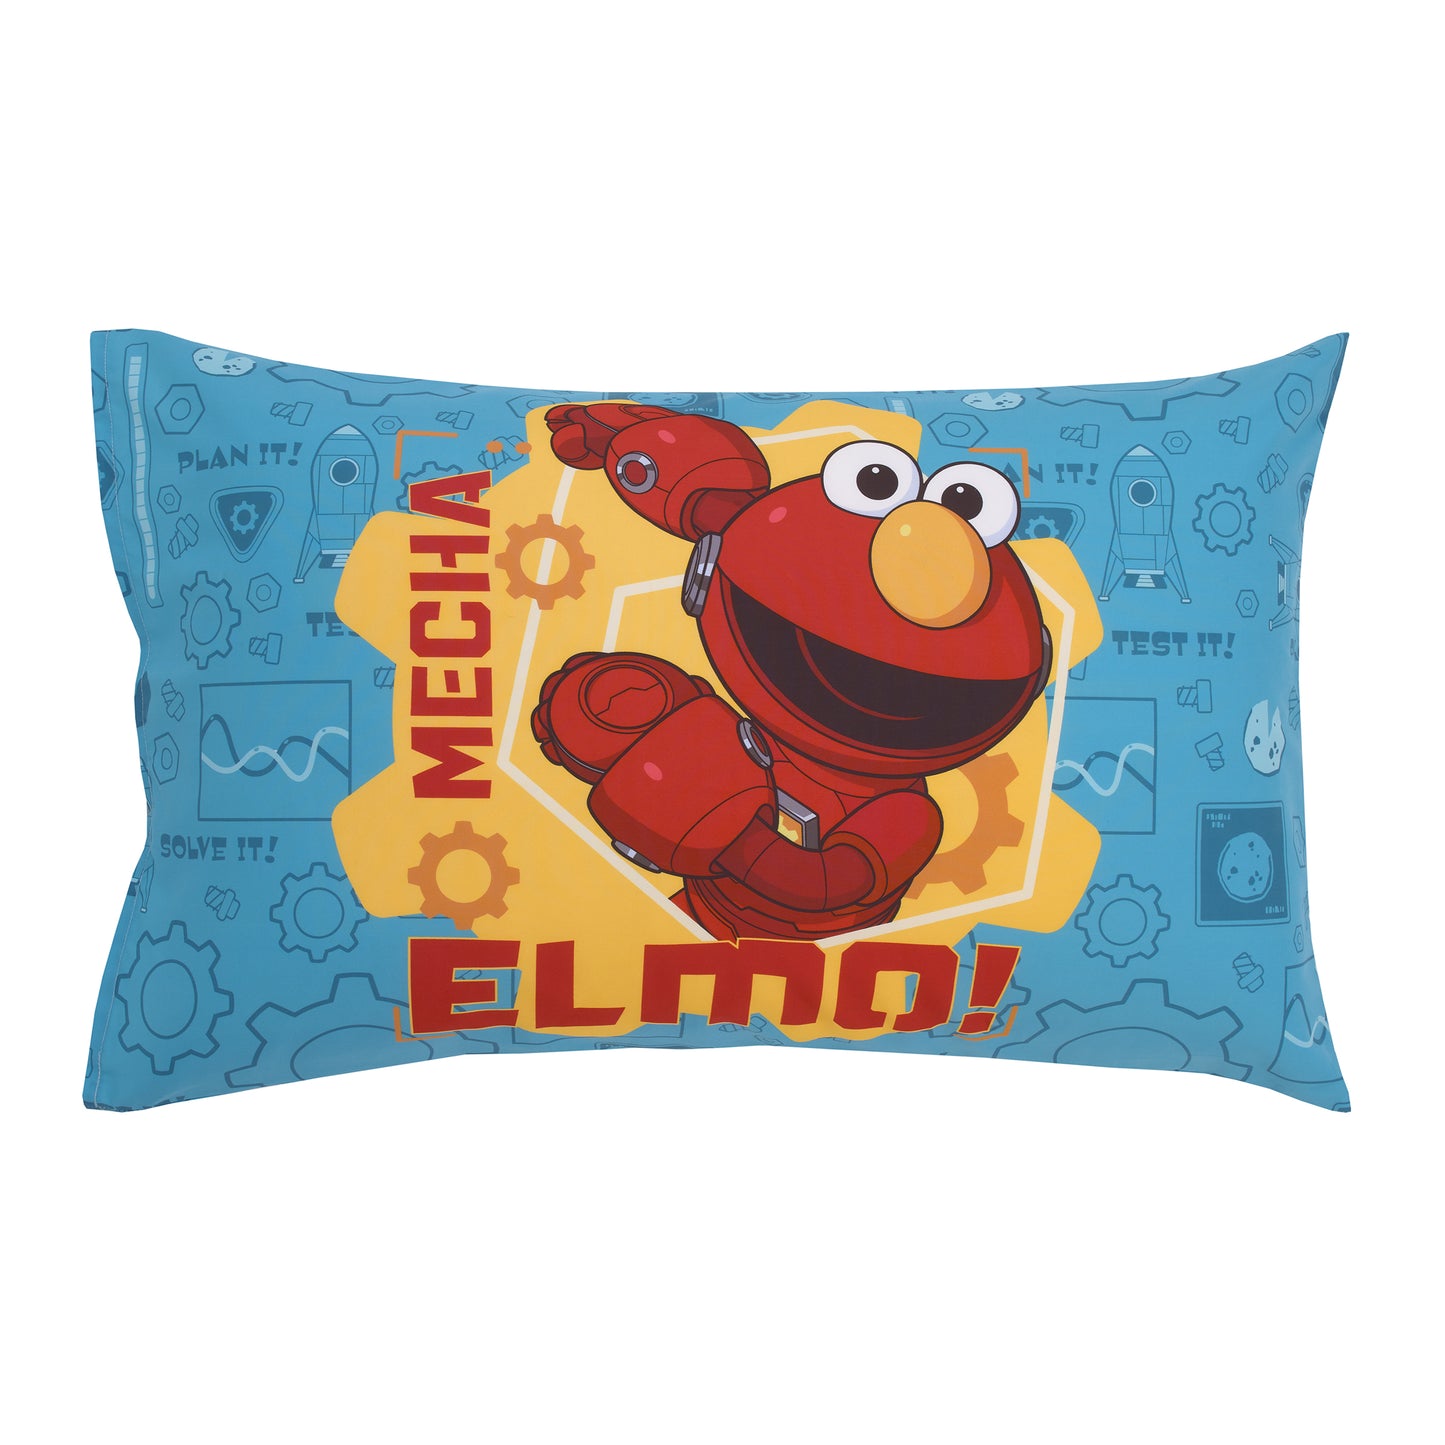 Sesame Street Mecha Builders Blue, Red, and Gold, with Cookie Monster, Elmo and Abby 4 Piece Toddler Bed Set - Comforter, Fitted Bottom Sheet, Flat Top Sheet, and Reversible Pillowcase